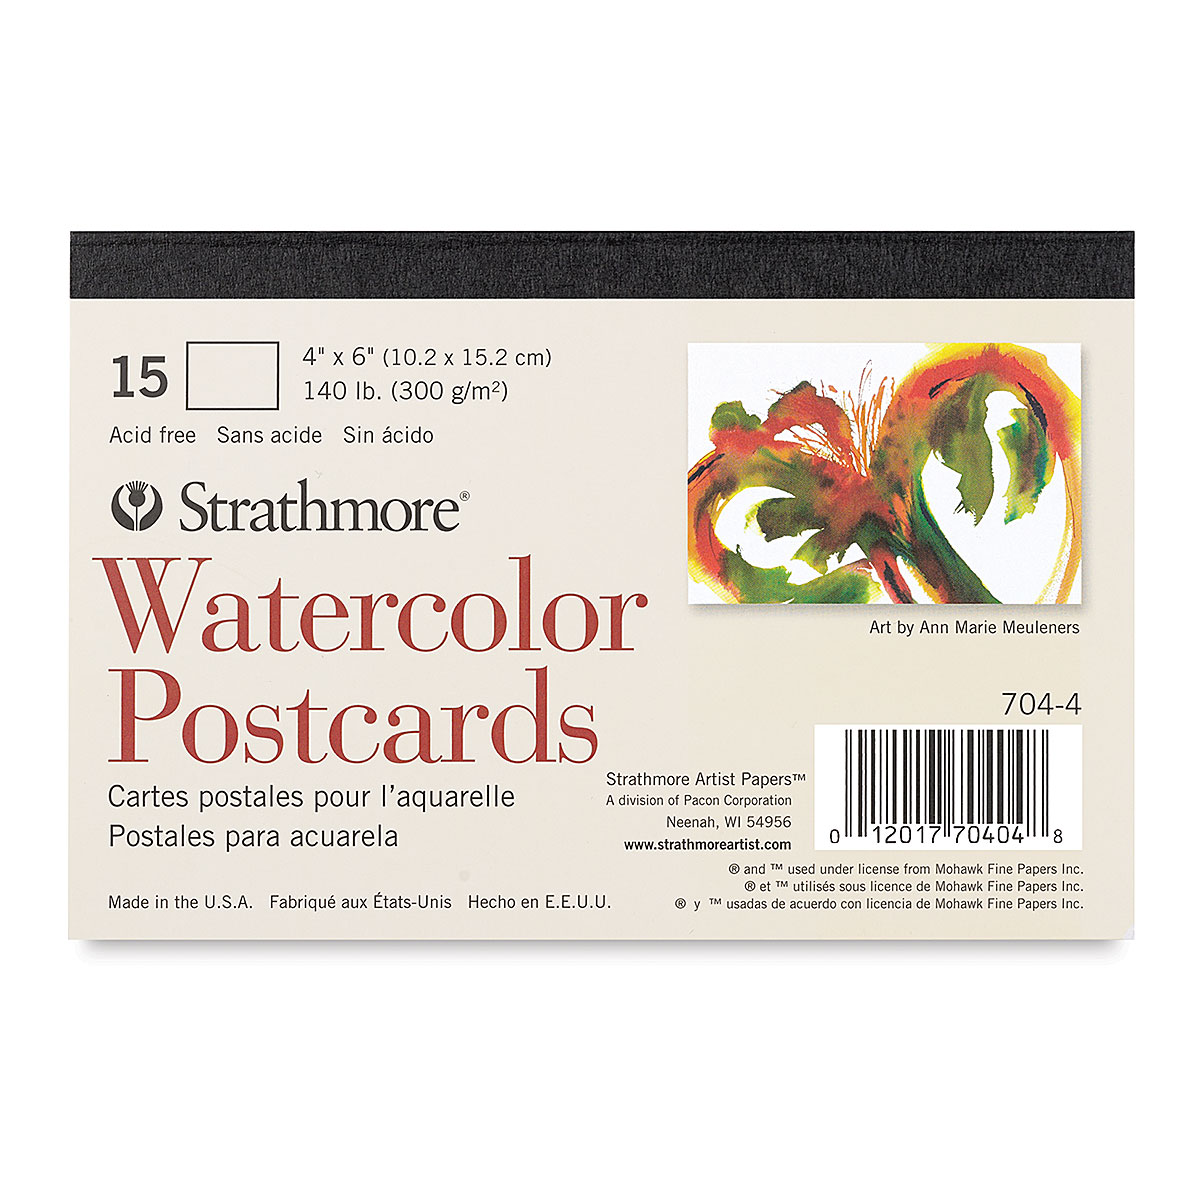 Strathmore 300 Series Watercolor Cards, 5x6.875 Inches, 6 Cards & Envelopes - Custom Greeting Cards for Weddings, Events, Birthdays, Holidays